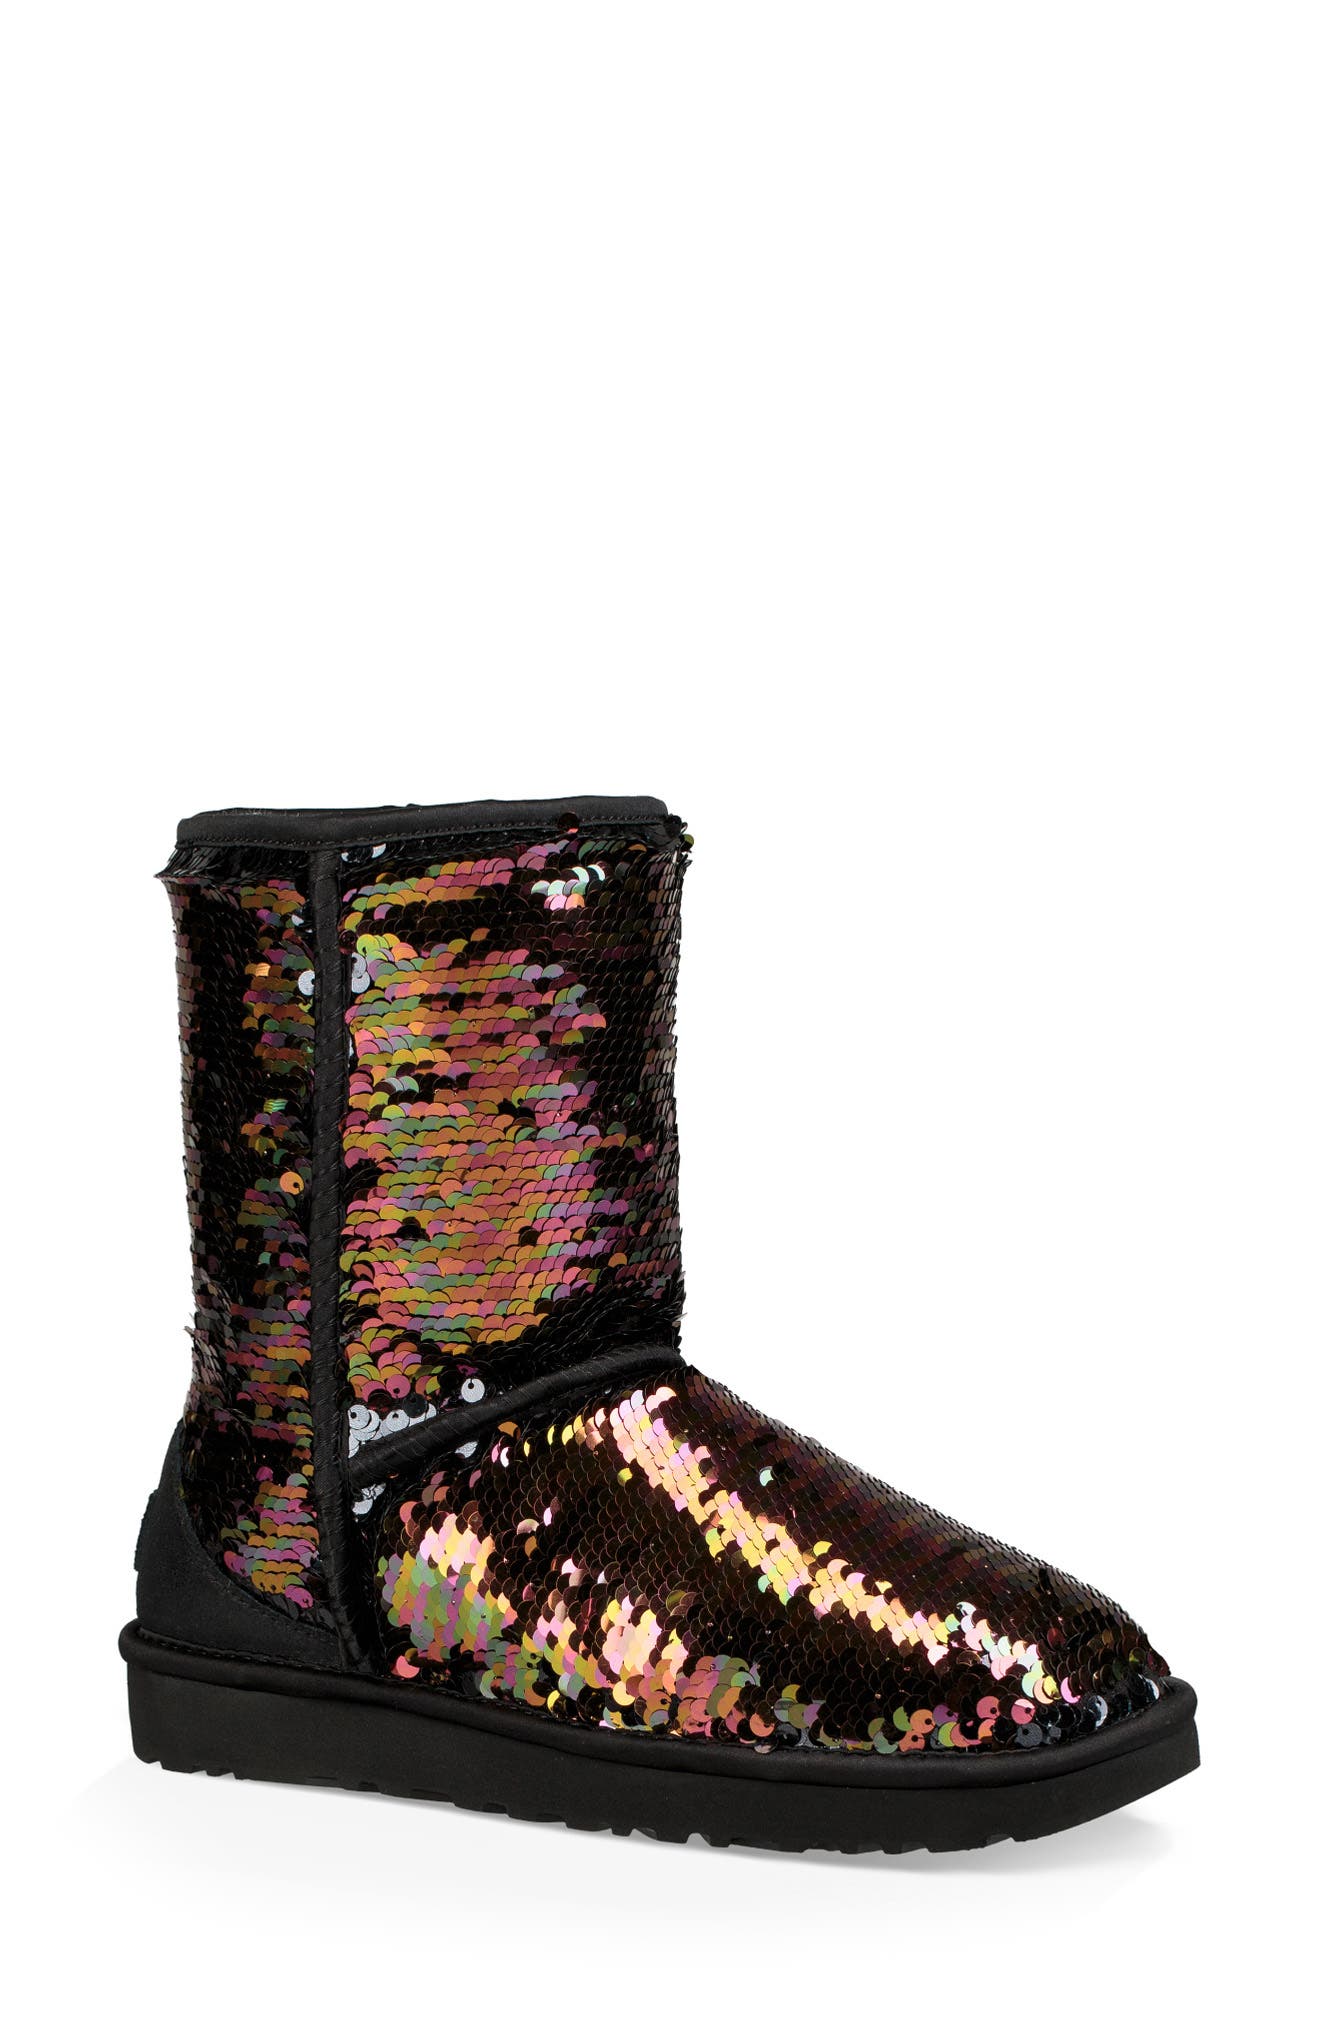 sequin ugg boots size 10